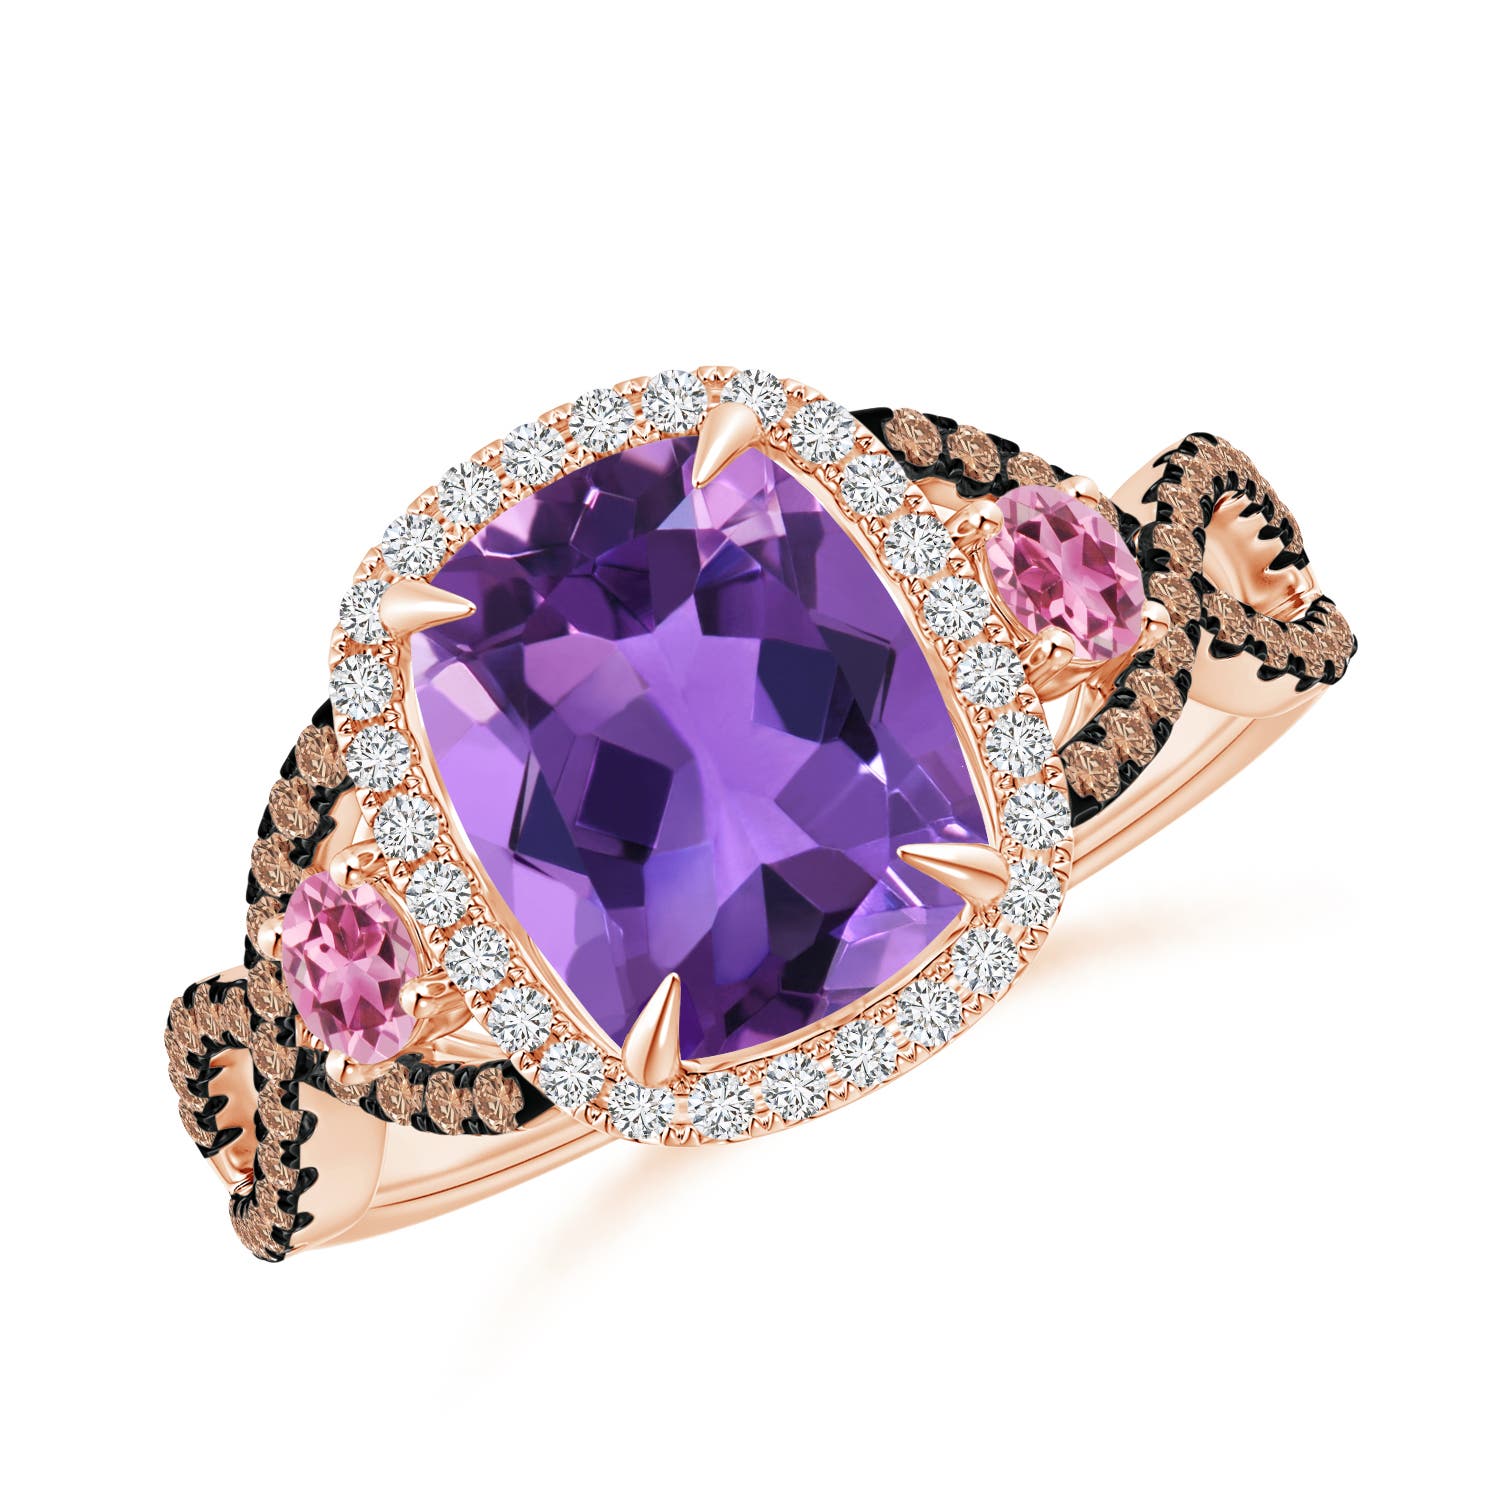 AAA - Amethyst / 2.59 CT / 14 KT Rose Gold